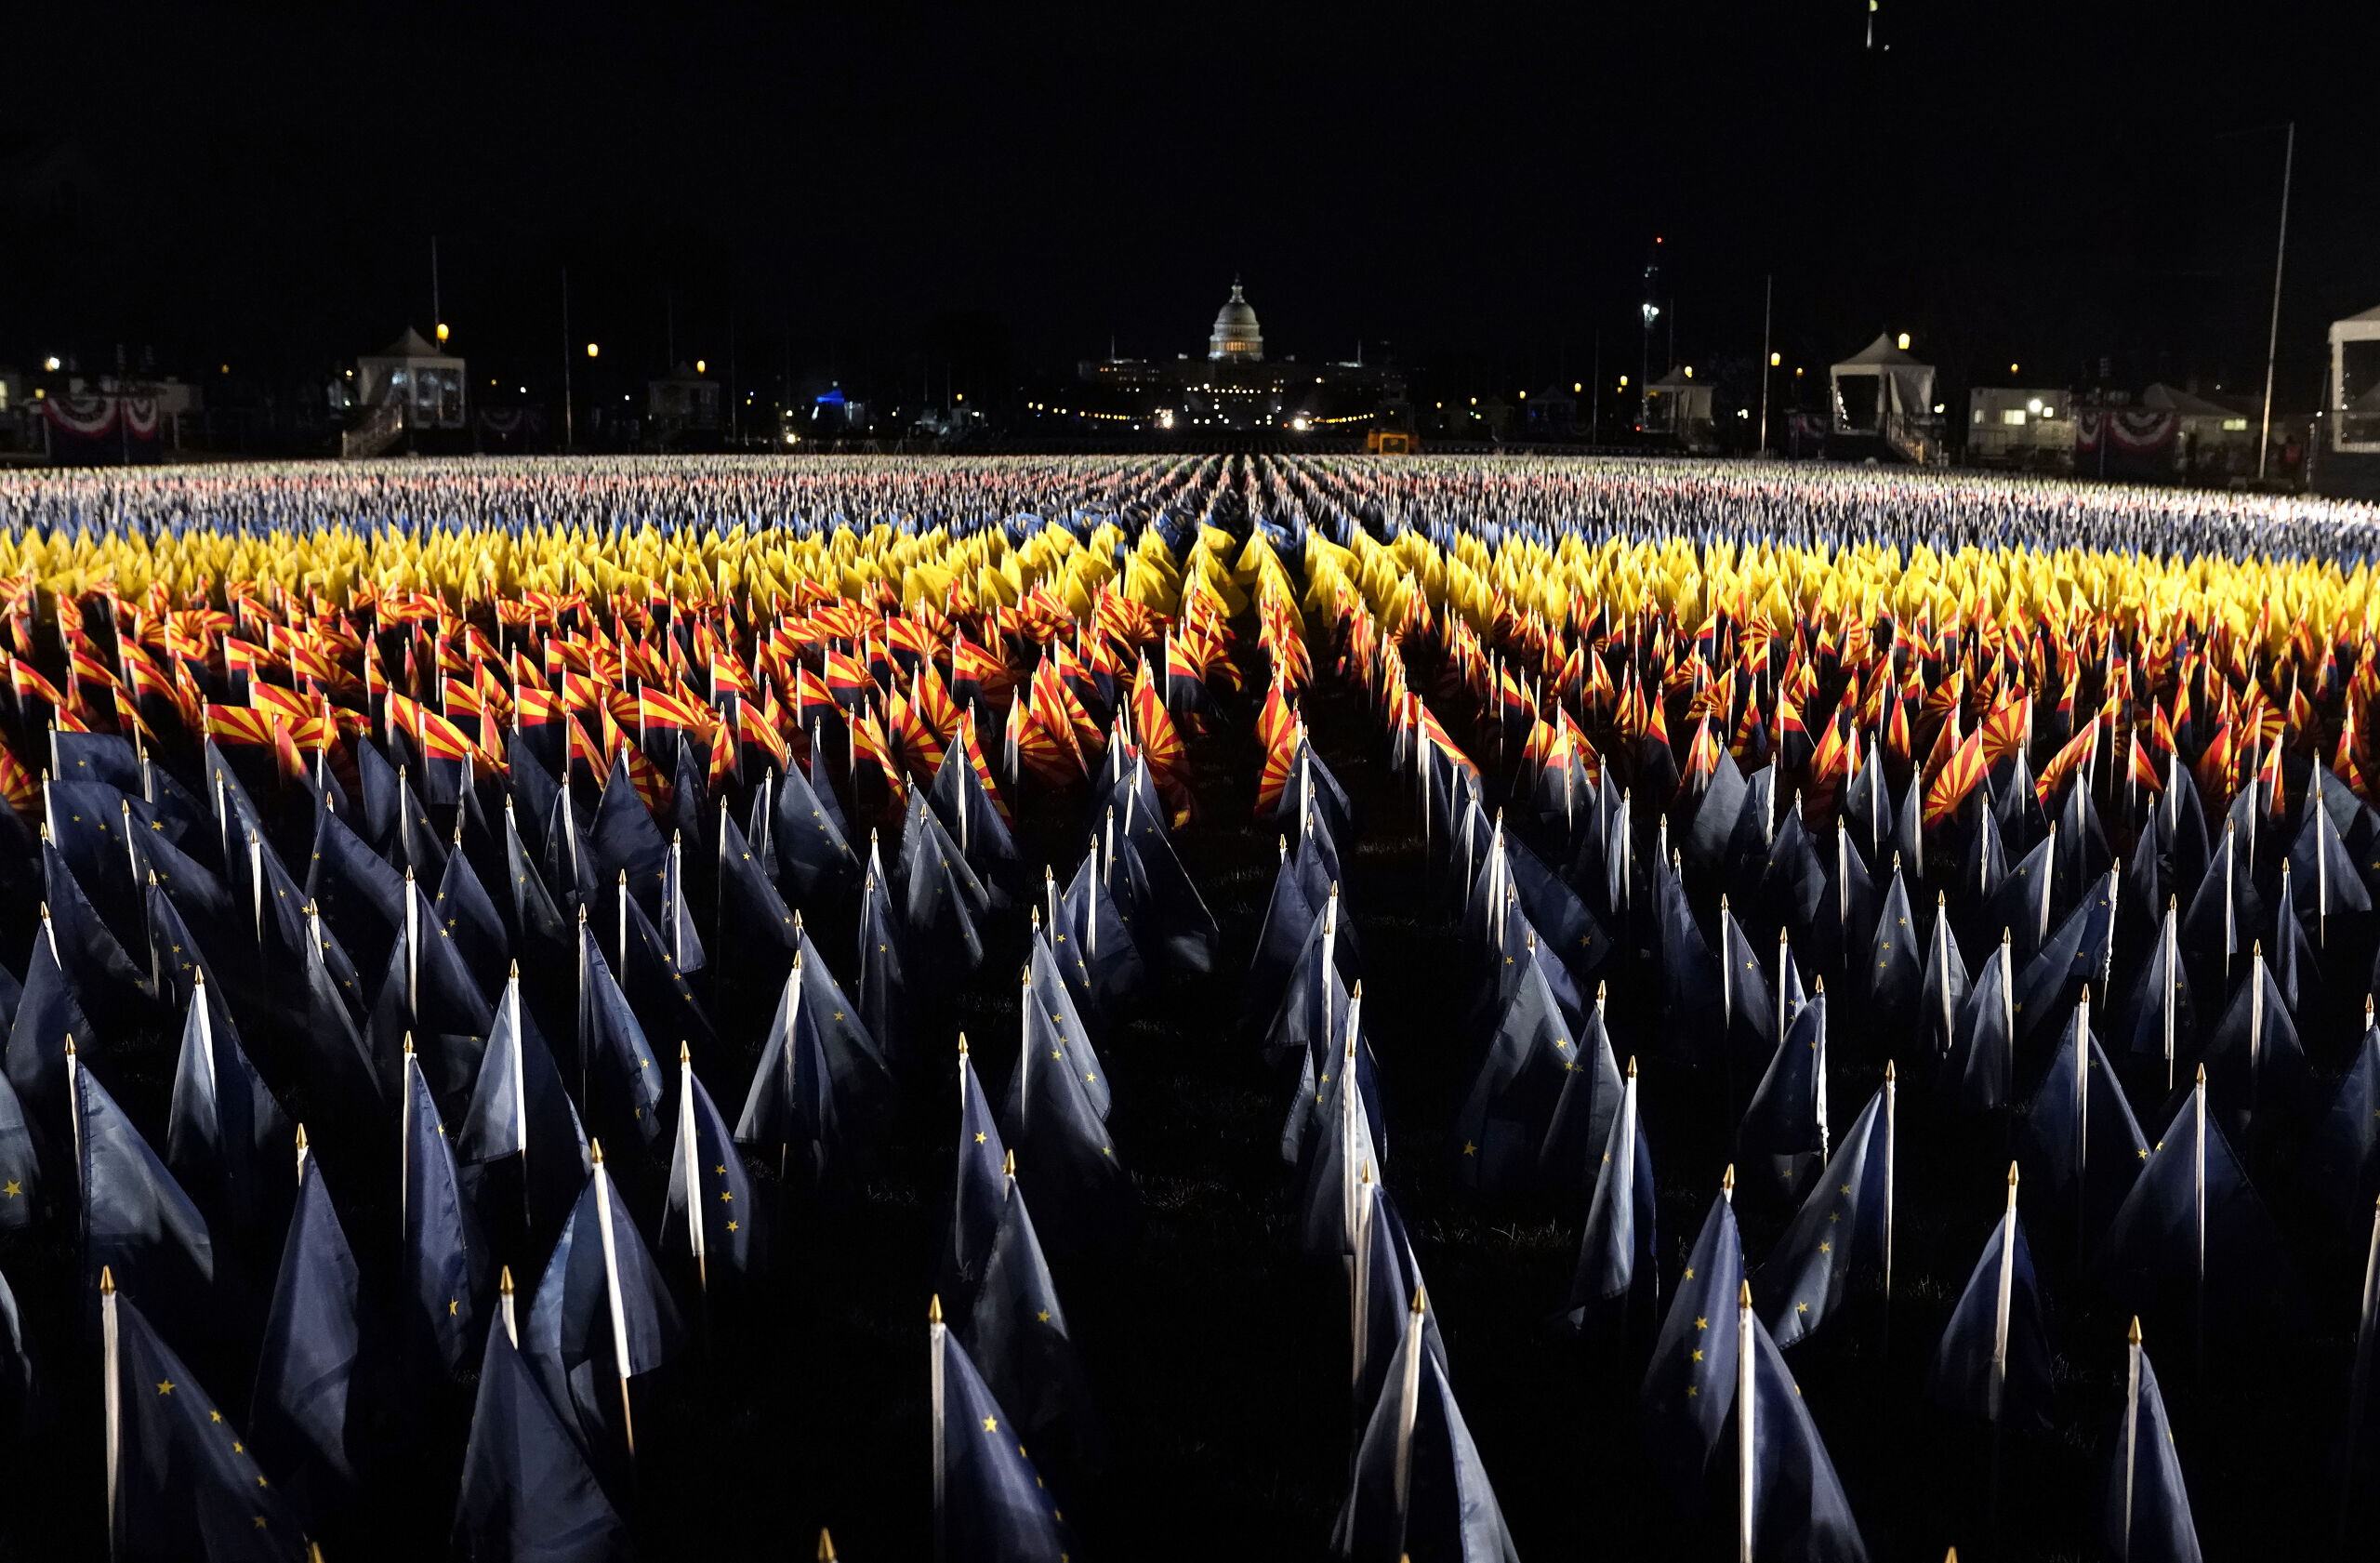 The Field of Flags